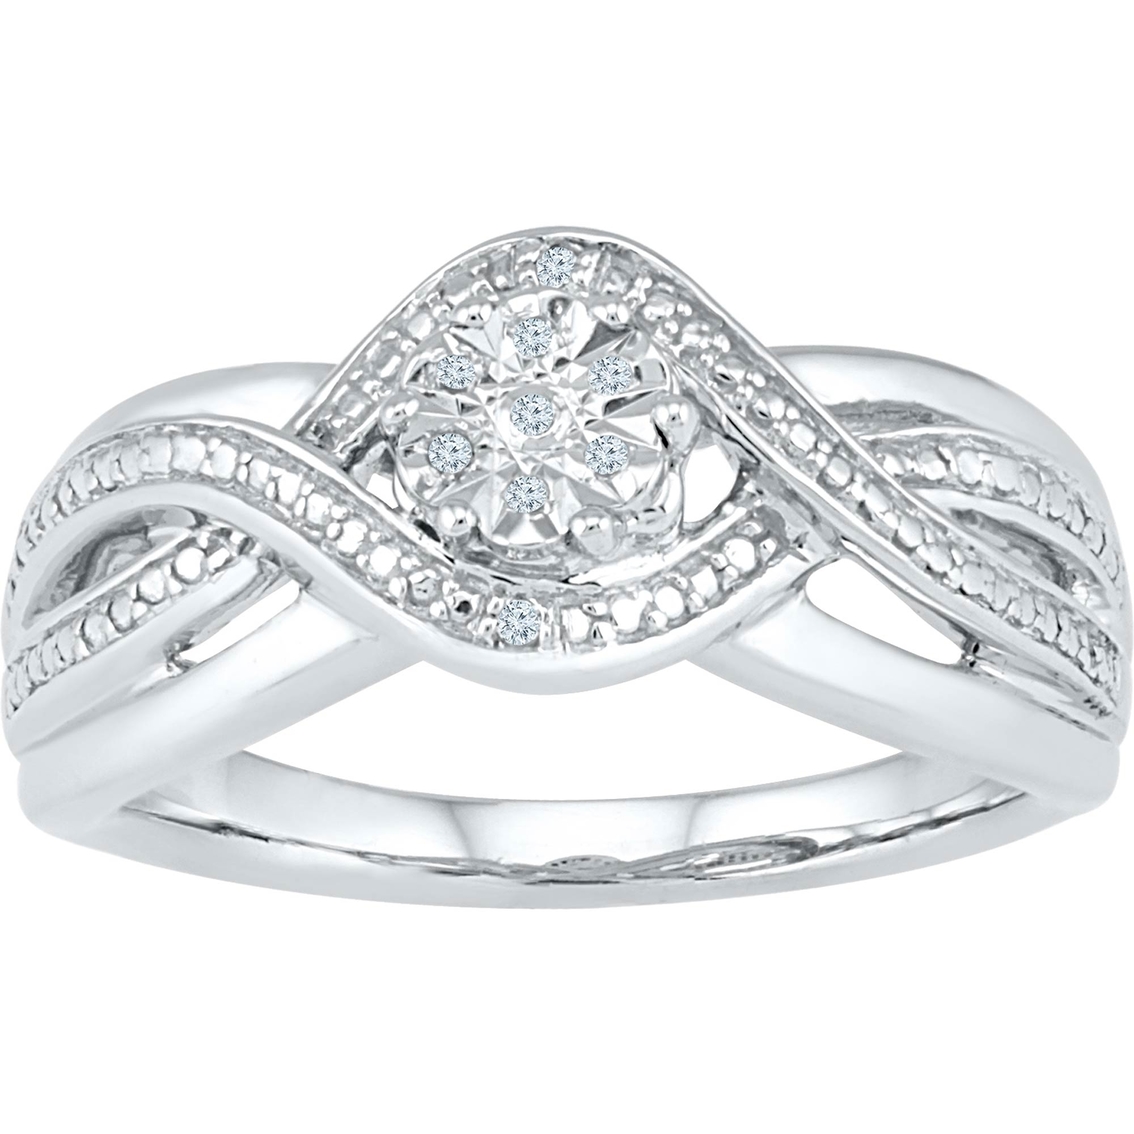 Sterling Silver Diamond Accent Fashion Ring - Image 2 of 2